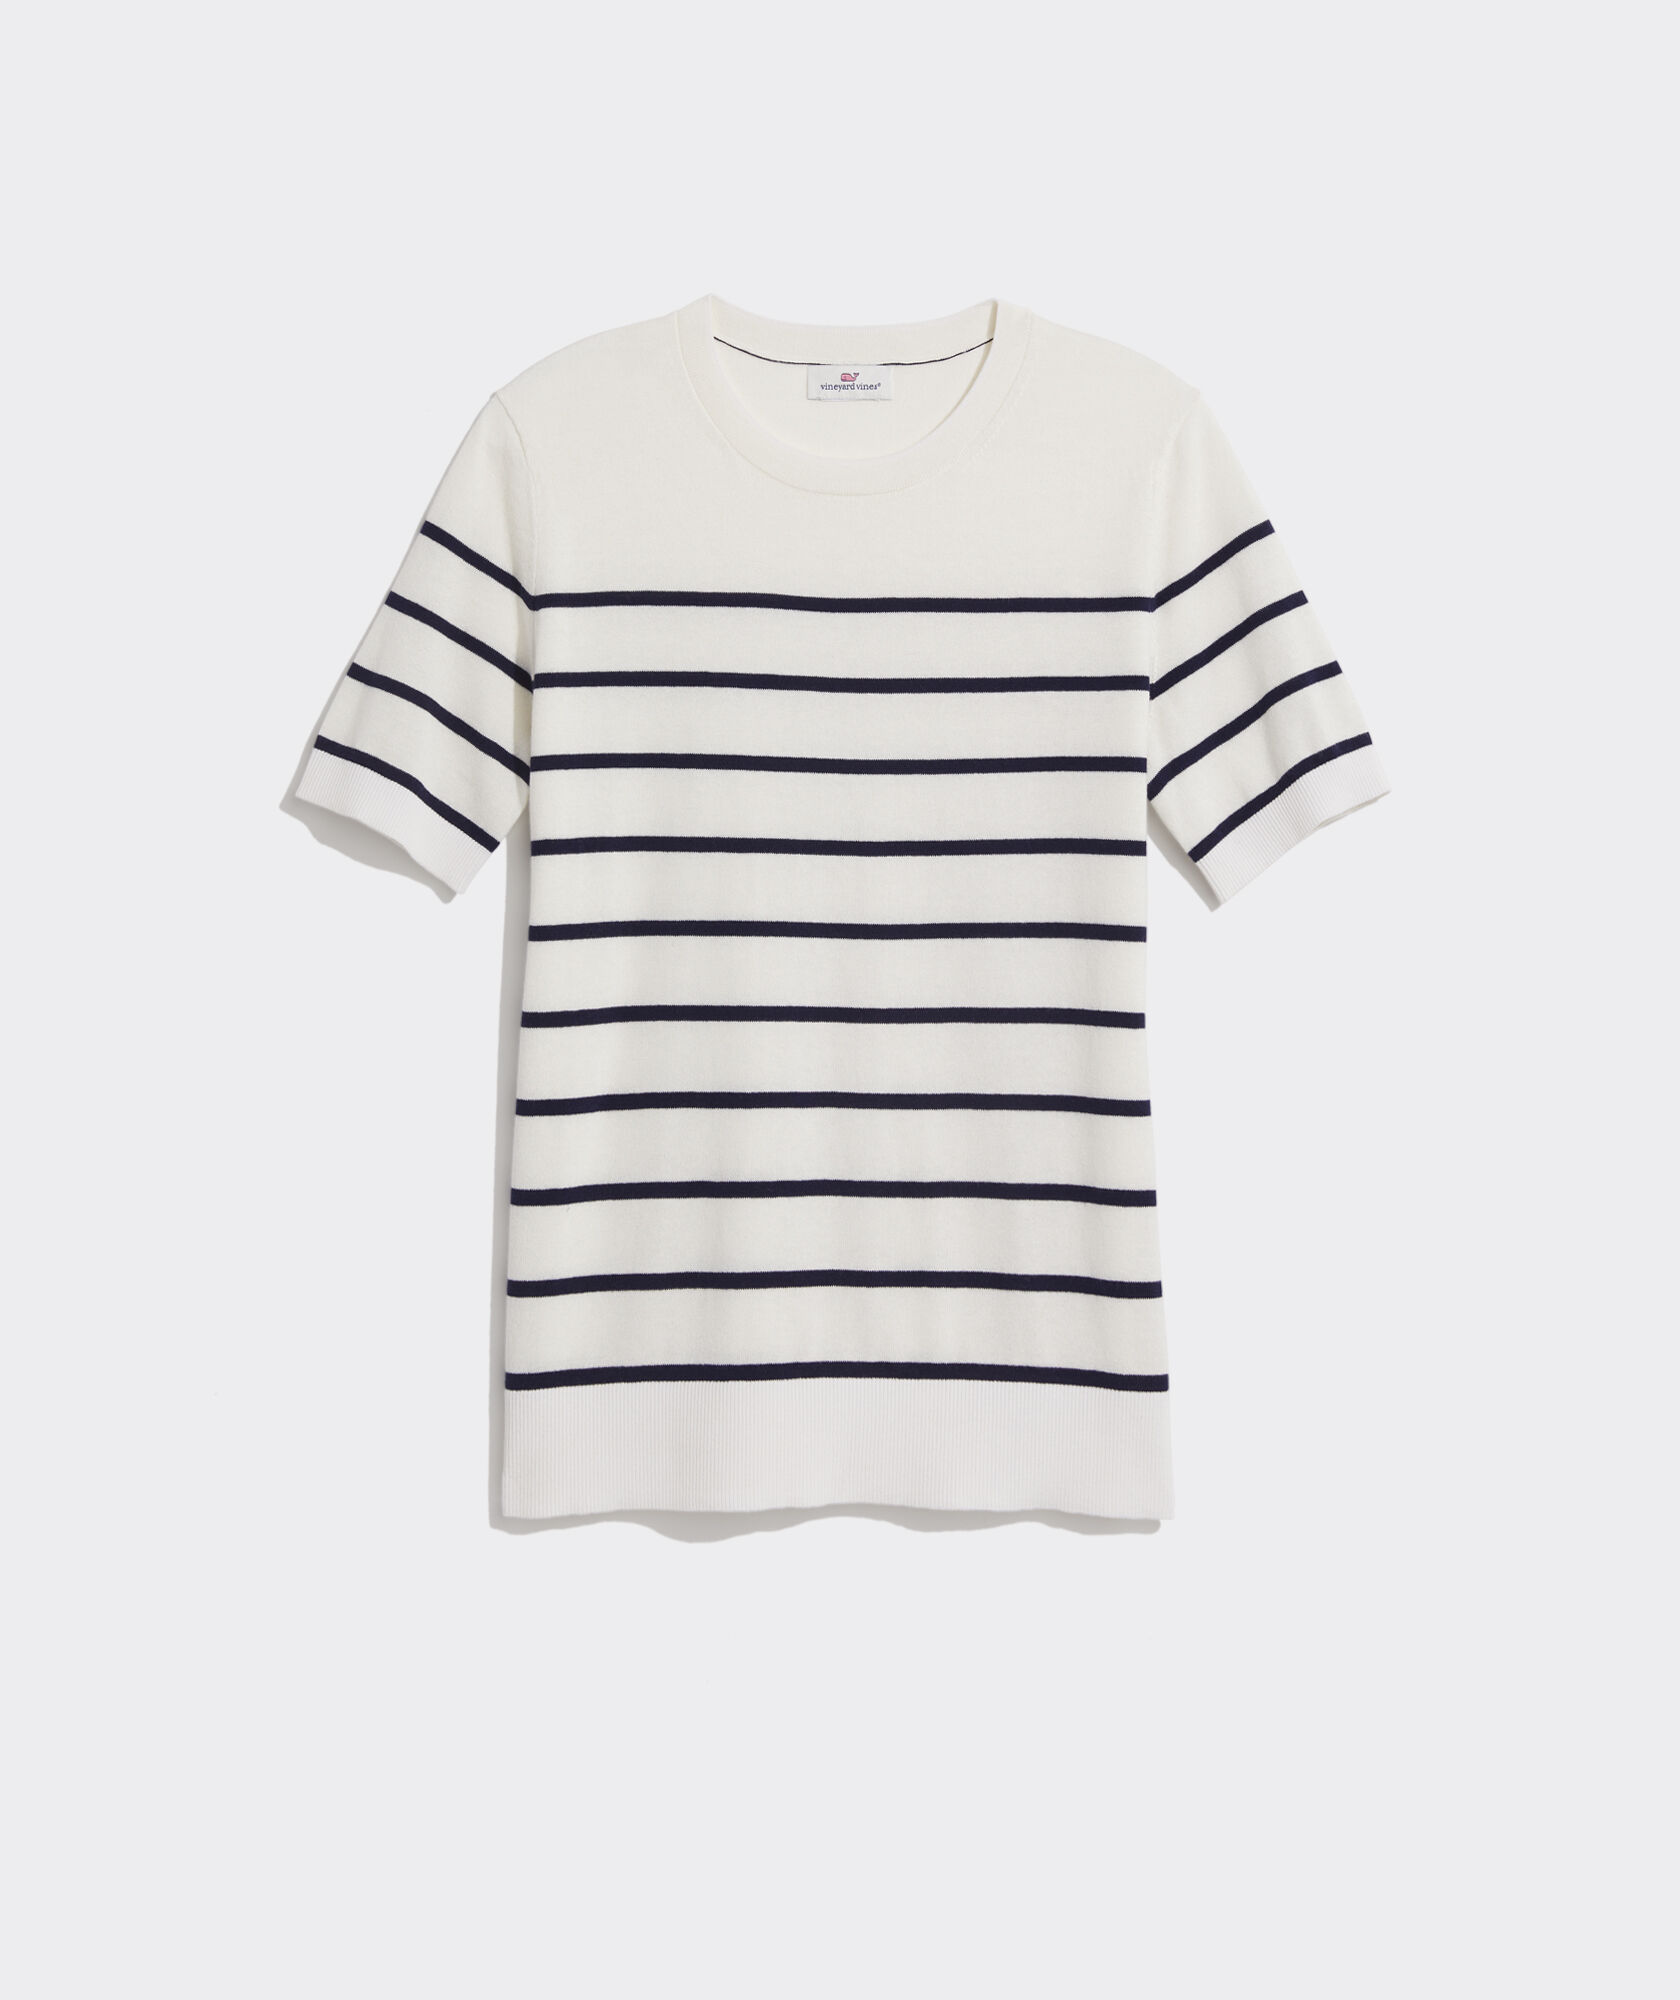 Shop Striped Luxe Short-Sleeve Sweater at vineyard vines